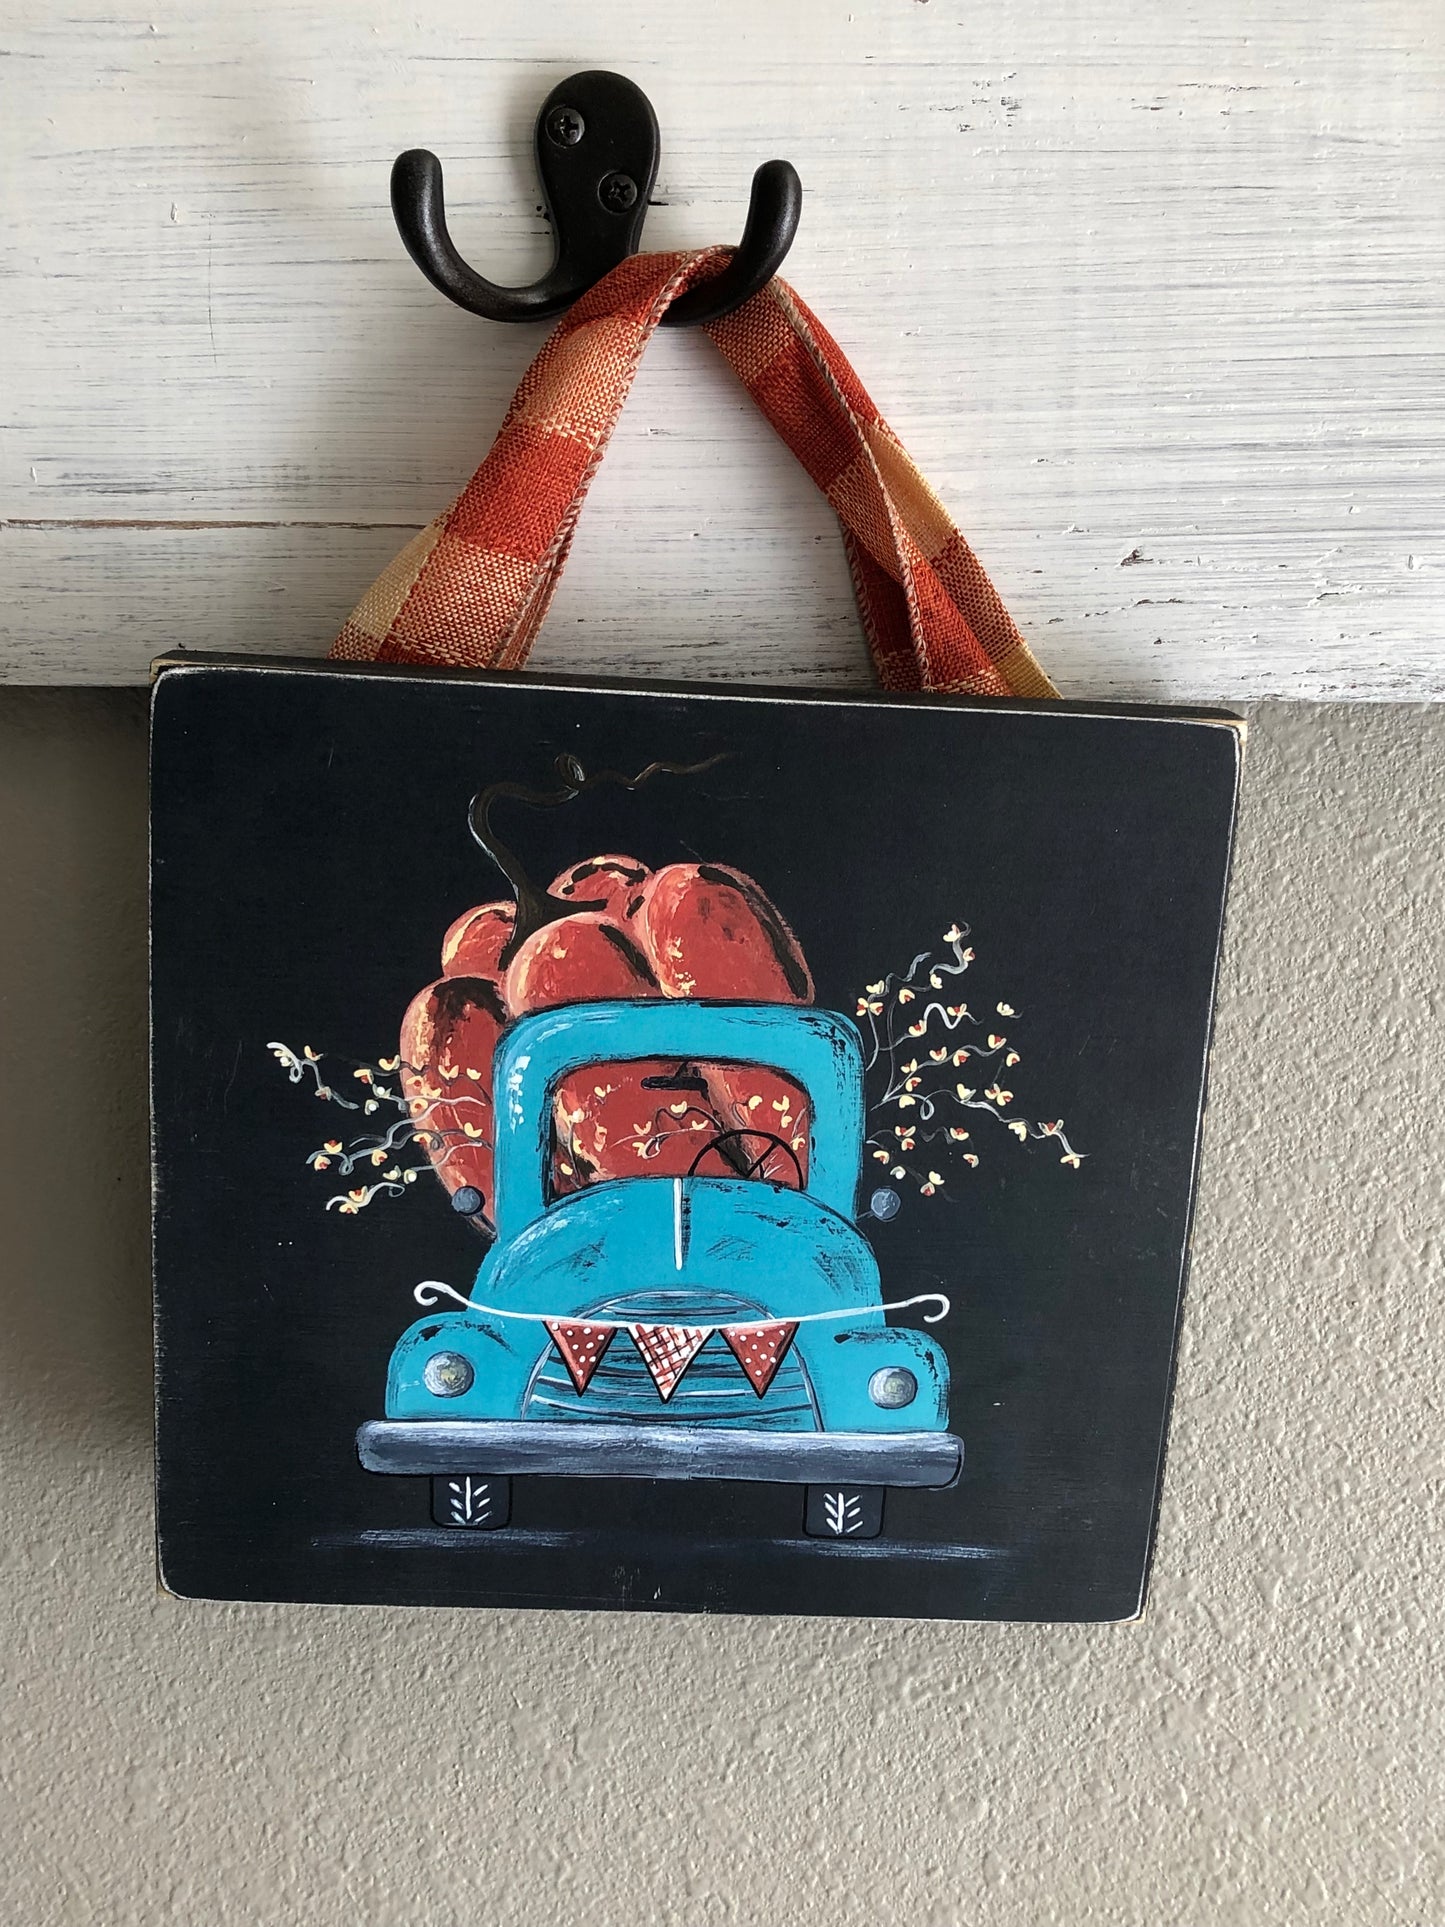 TRUCK -7.25 IN. TURQUOISE TRUCK WITH PUMPKIN PRINT - WOOD SIGN